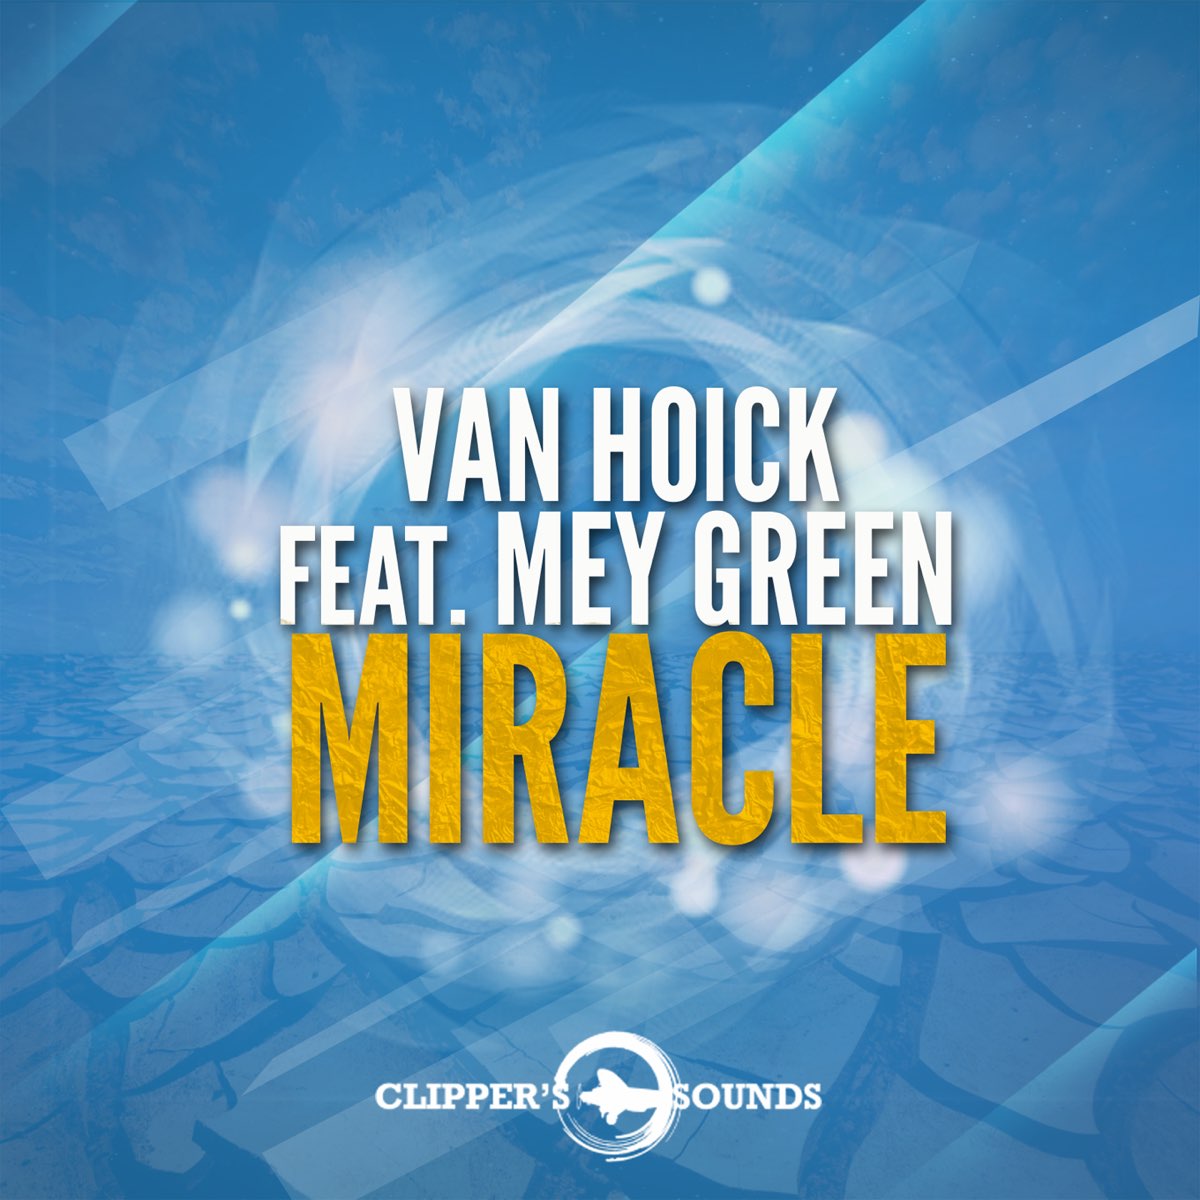 Hoick. Miracle feat